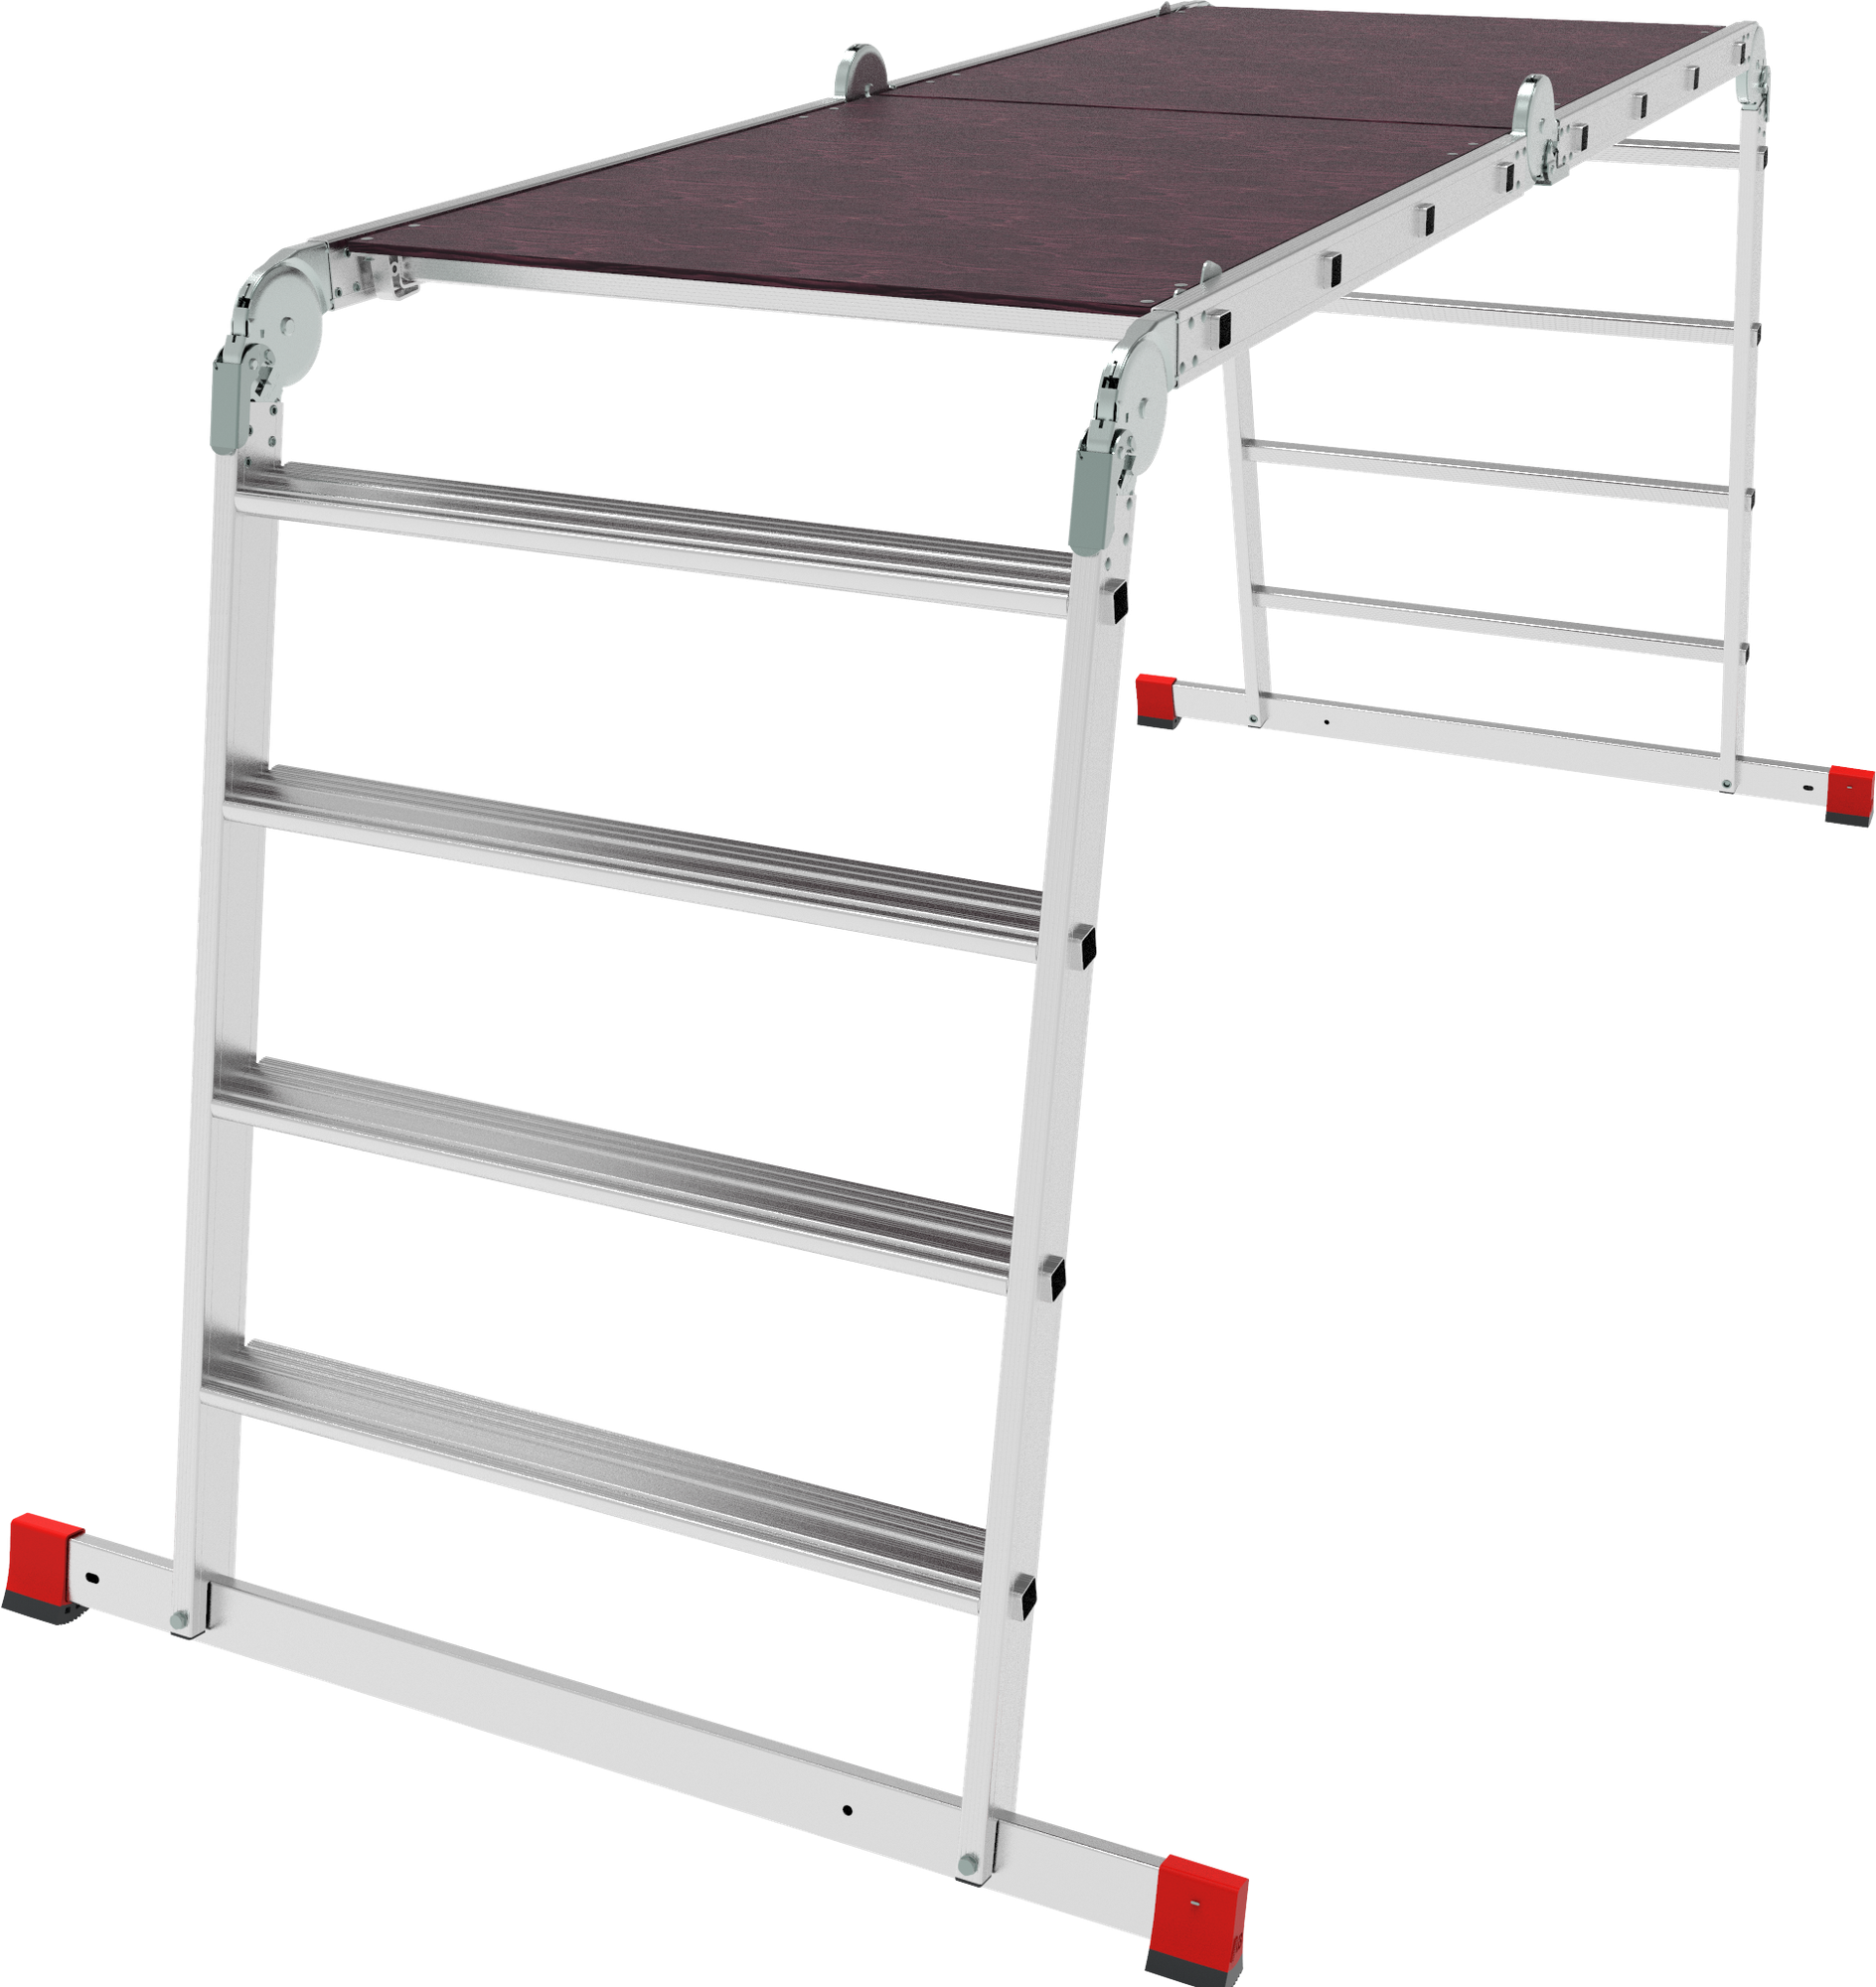 Multipurpose aluminum professional hinged rung ladder 800 mm width with 80 mm flanged steps and platform NV3336 sku 3336404